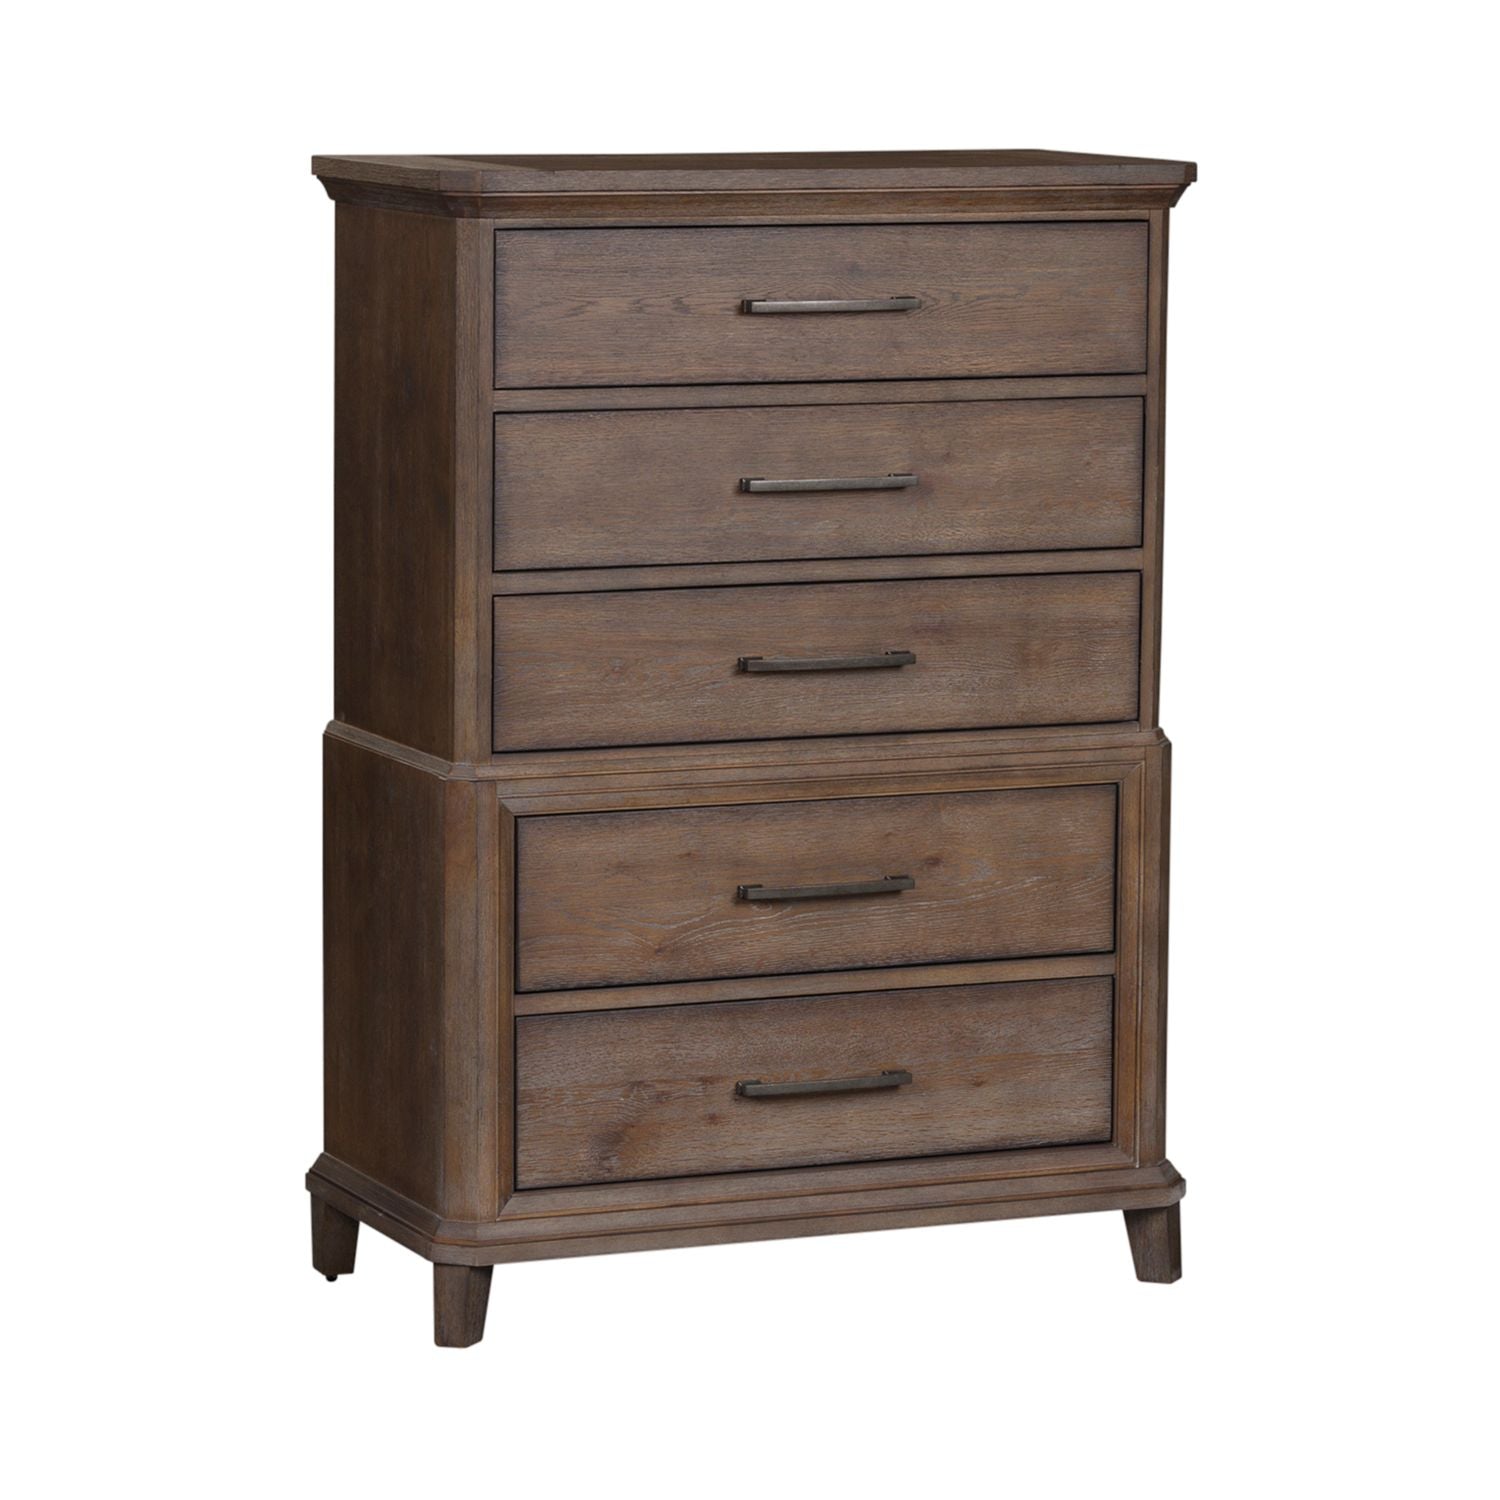 Artisan Prairie 823-BR Bedroom Collection from Liberty Furniture